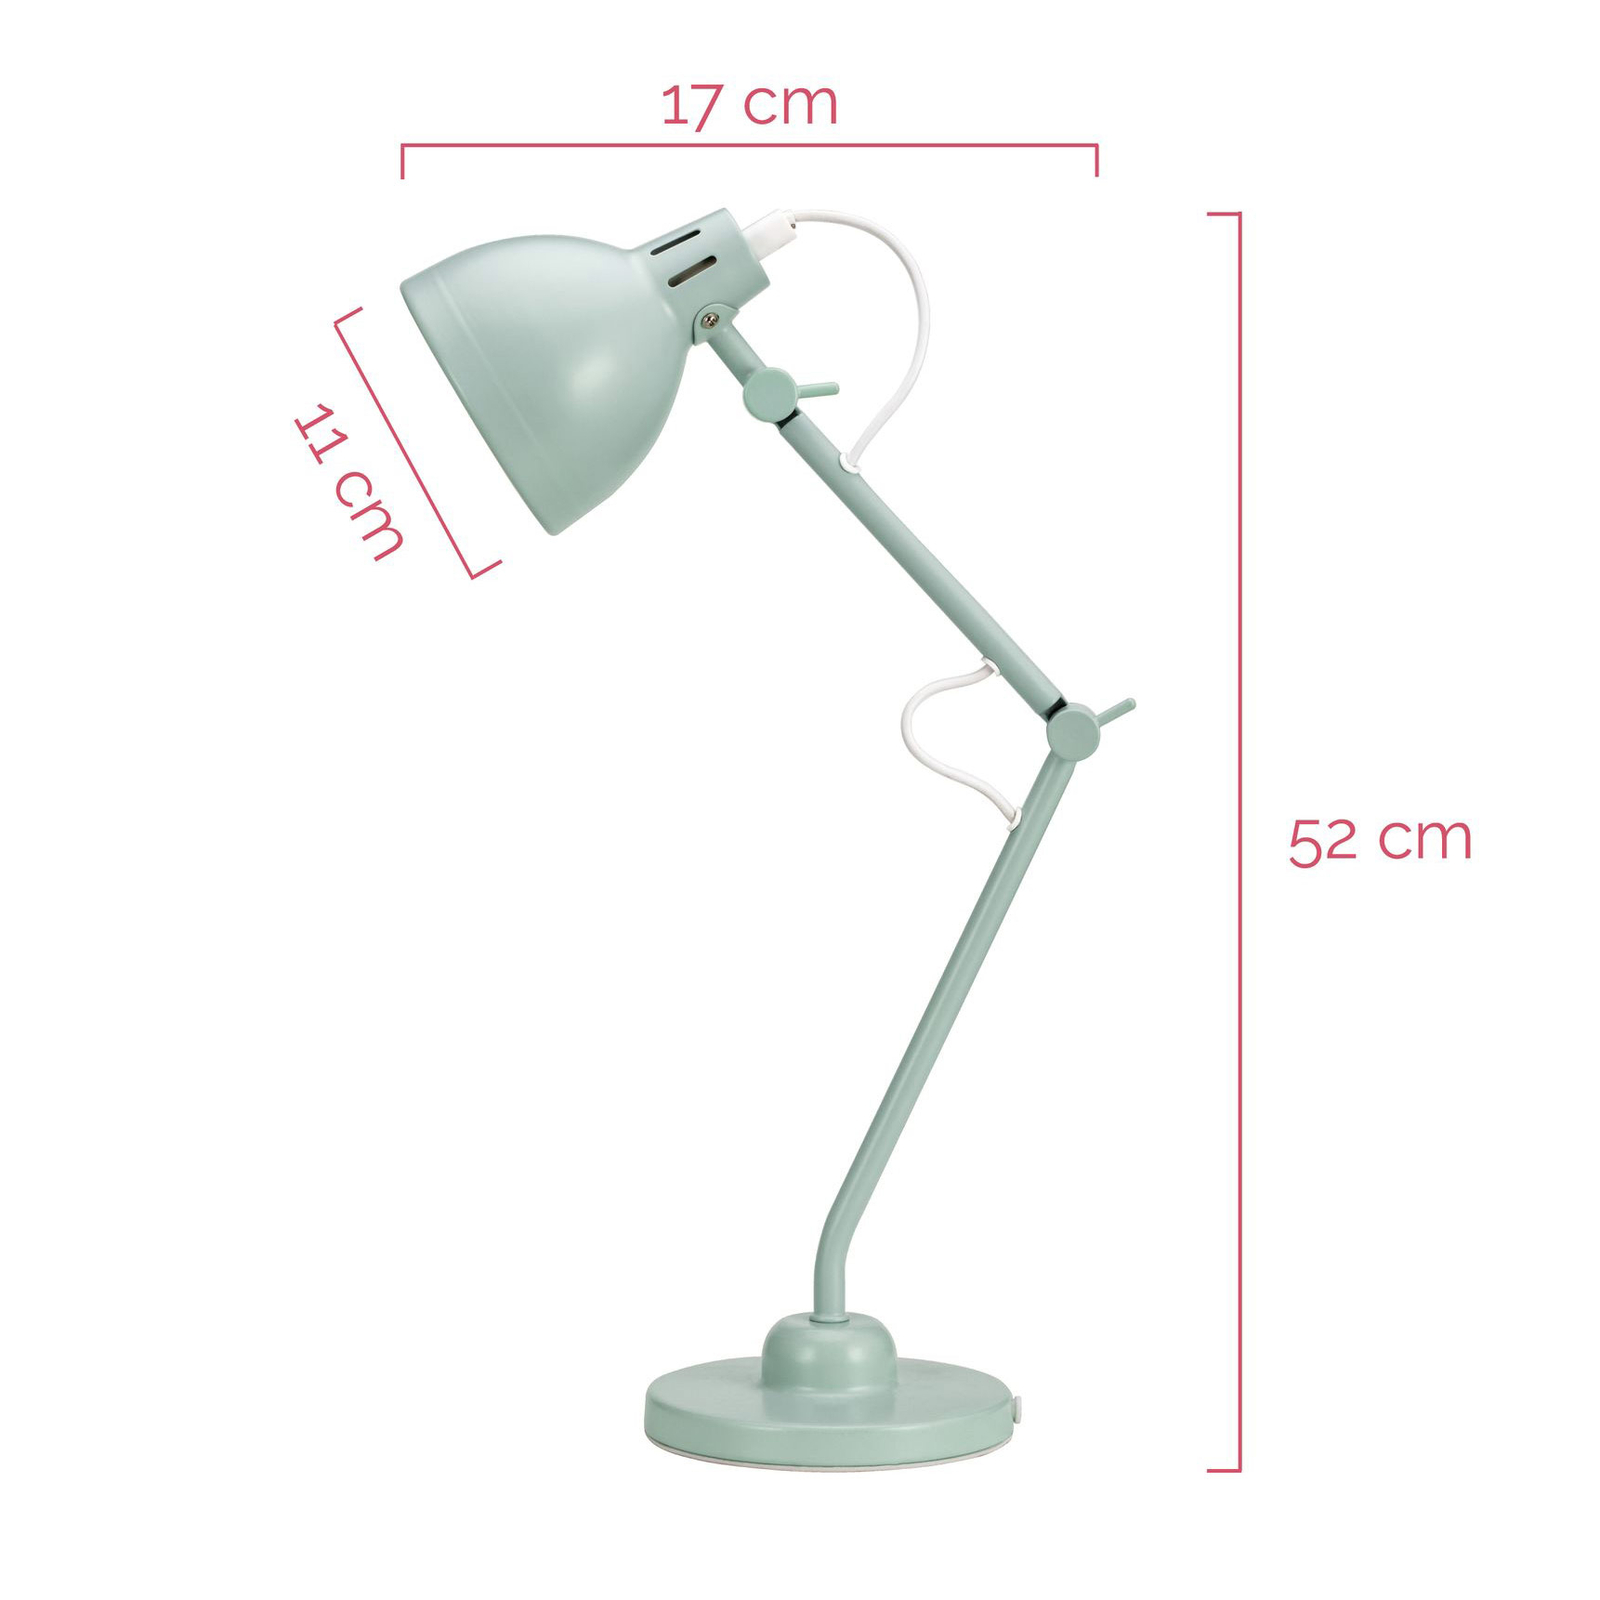 Pauleen True Buddy table lamp in soft green